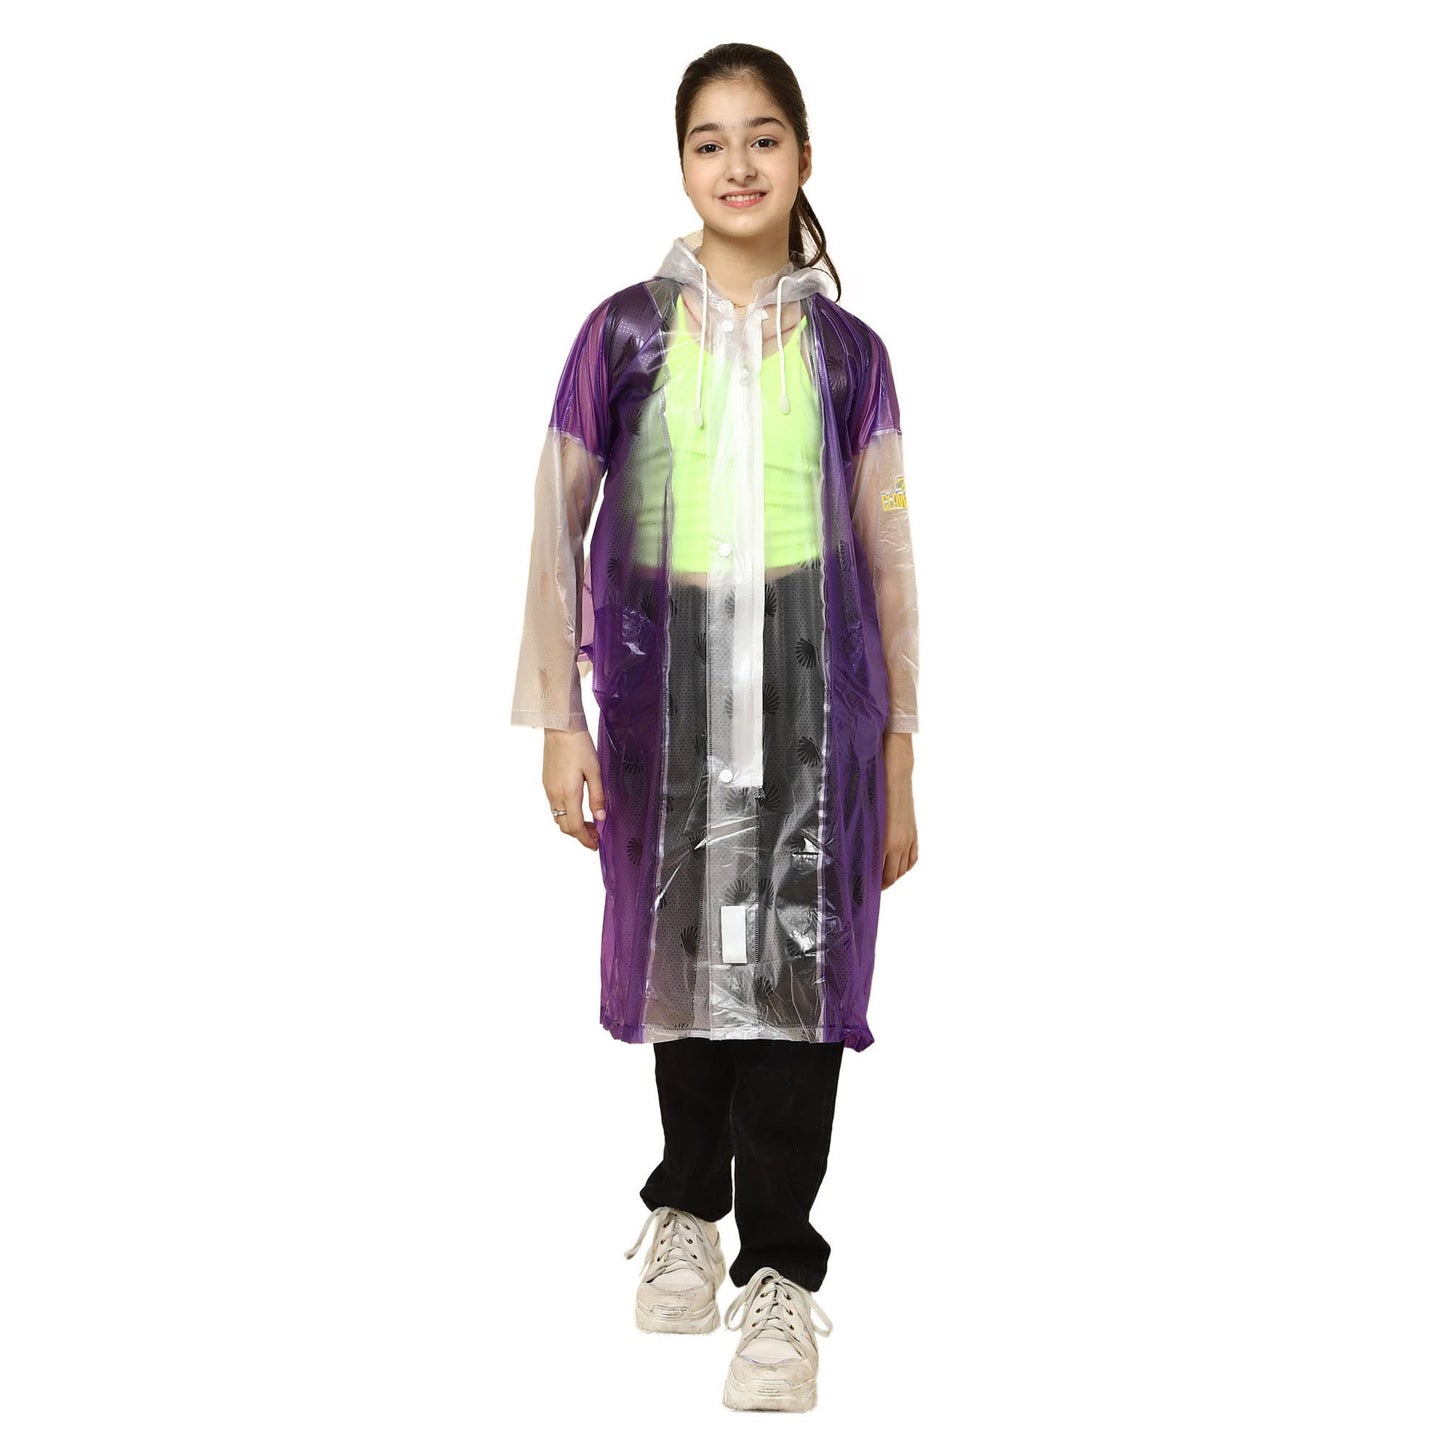 THE CLOWNFISH Archie Series Kids Waterproof PVC Longcoat with Adjustable Hood & Extra Space for Backpack/Schoolbag Holding. Plastic Pouch. Kid Age-8-9 years (Size-33-Green)